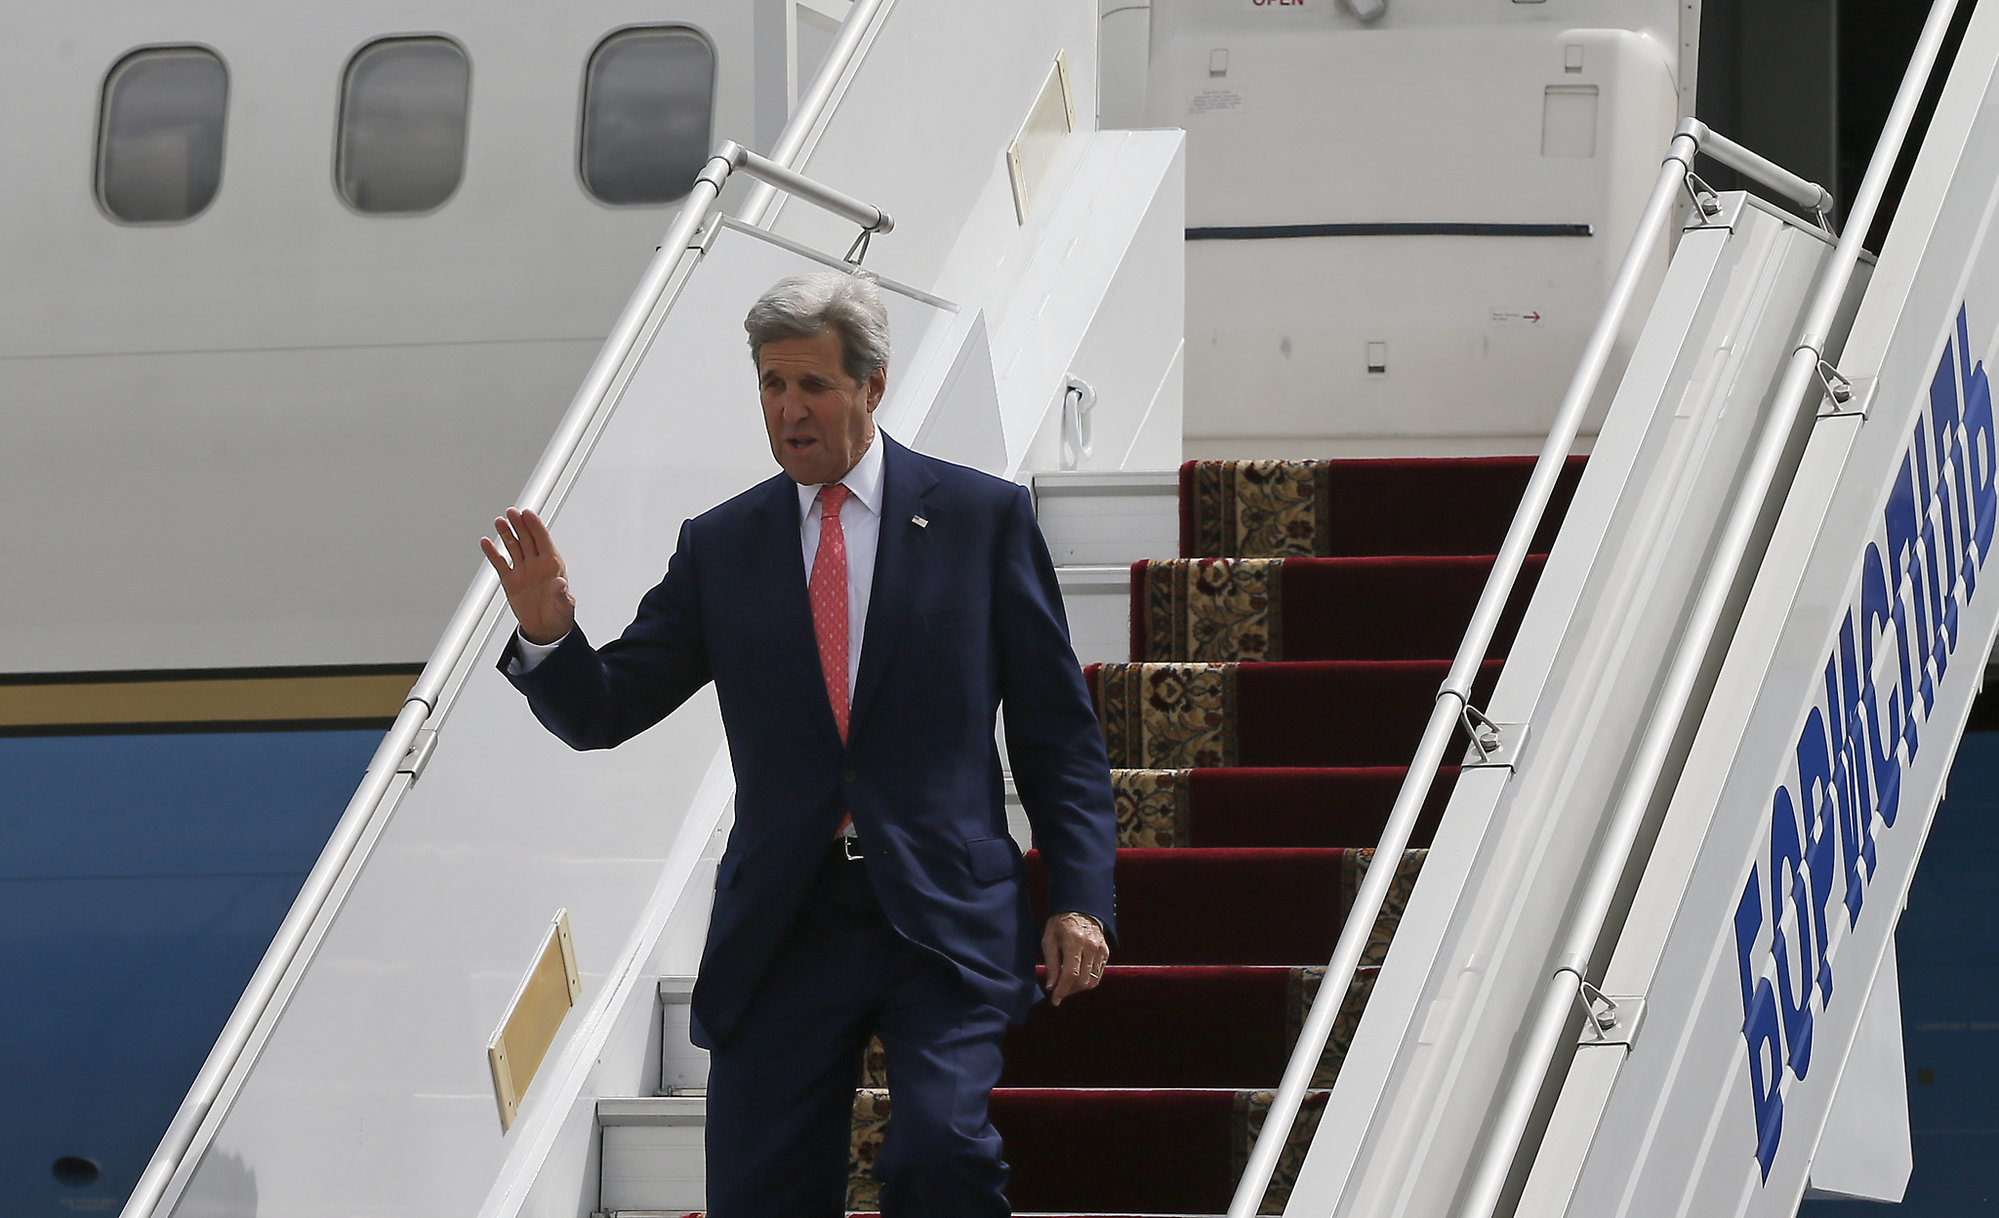 Kerry in Ukraine to Offer Help From United States